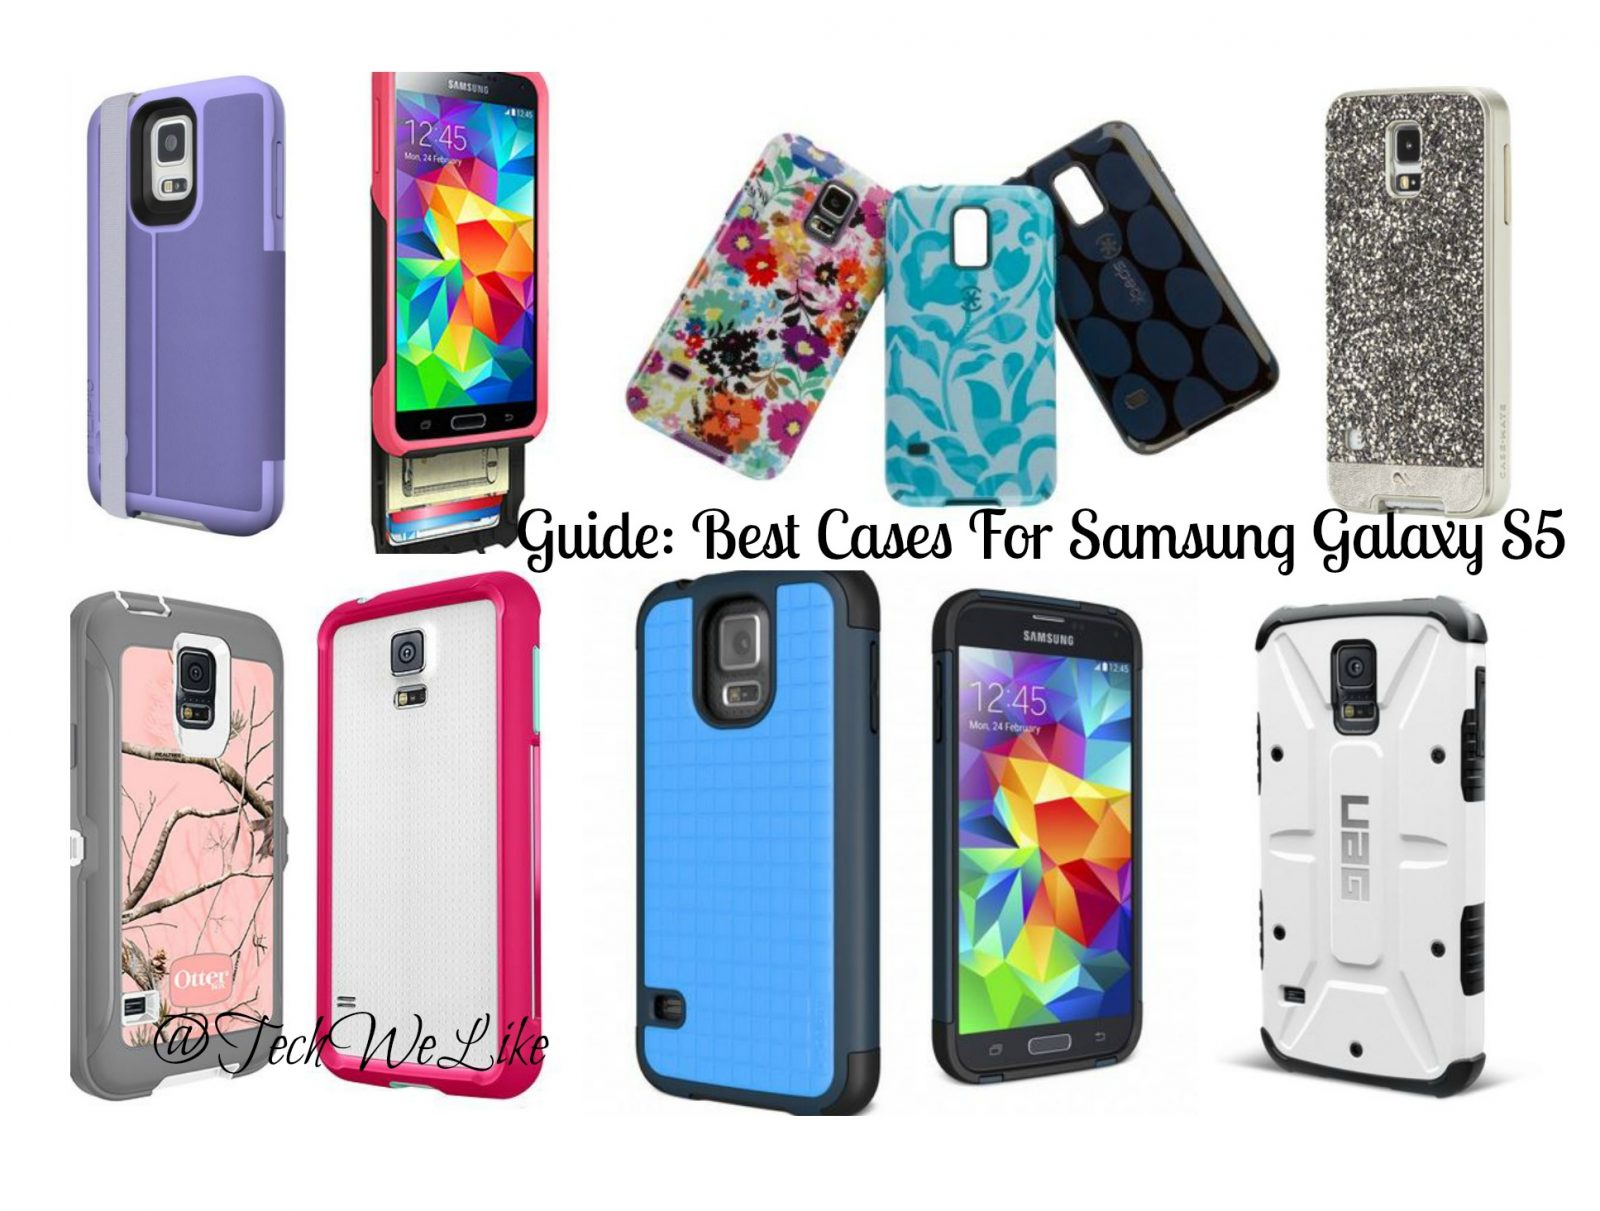 Guide Best Cases for Samsung Galaxy S5 #GalaxyS5